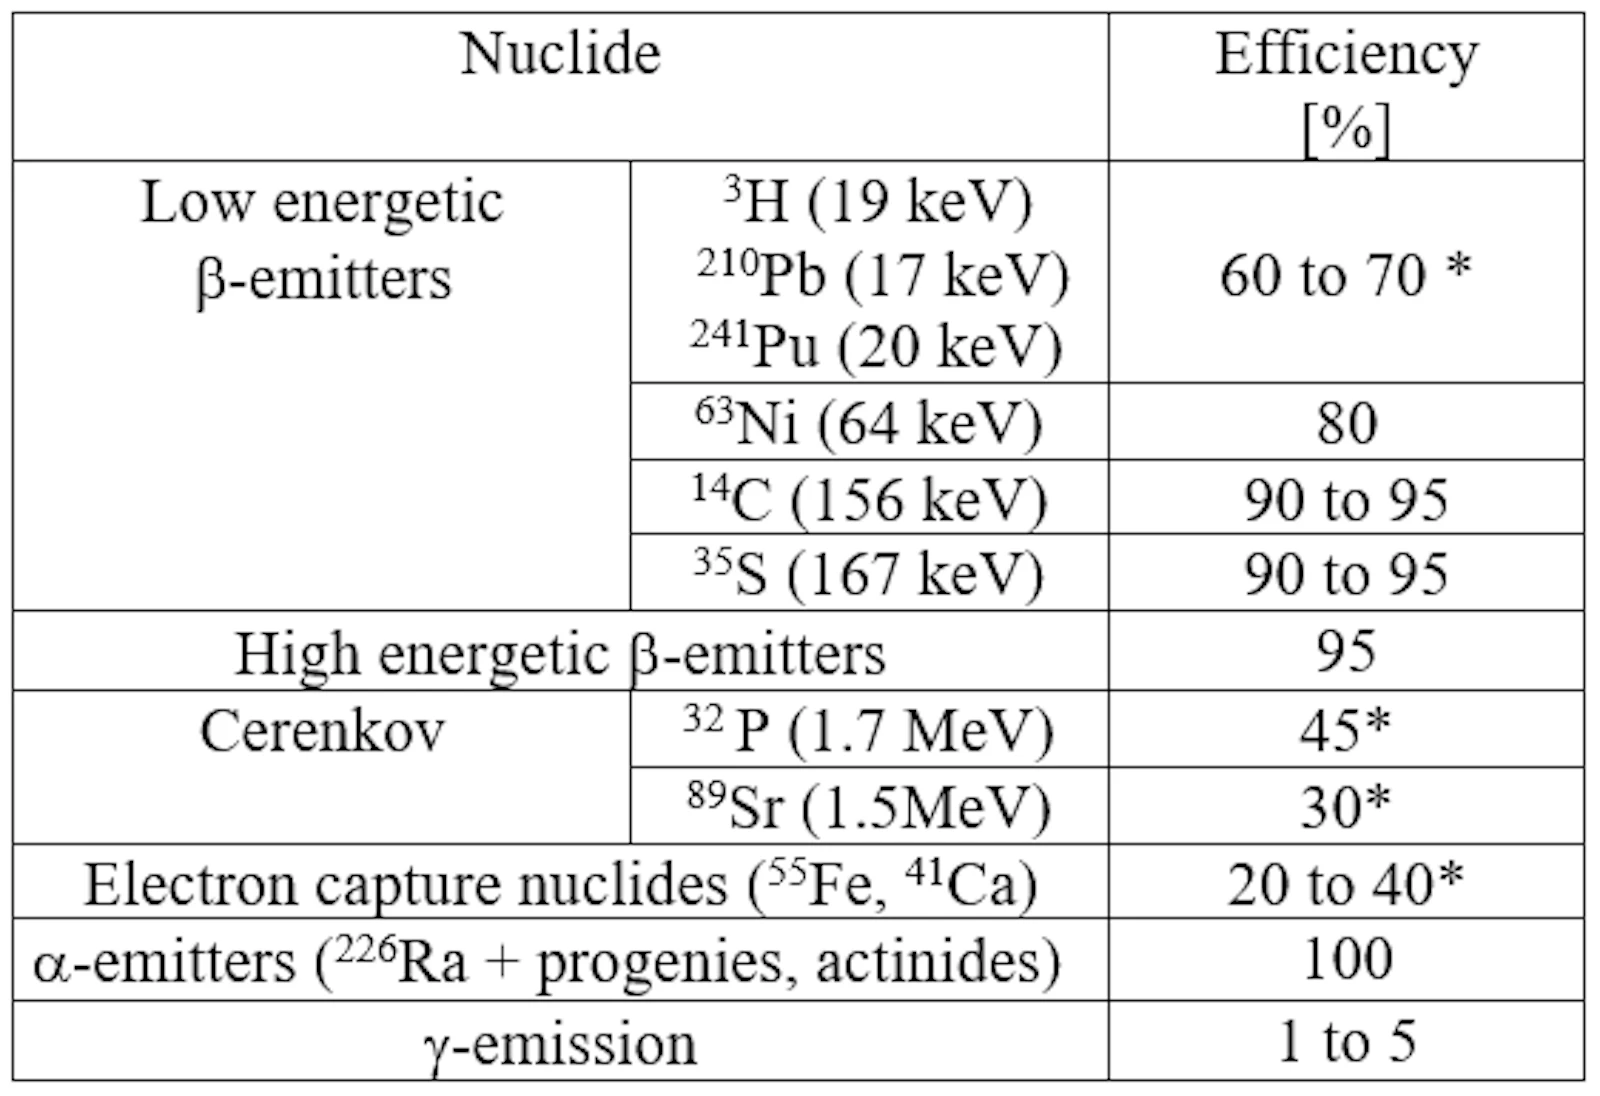 Typical counting efficiencies for various radionuclides by LS